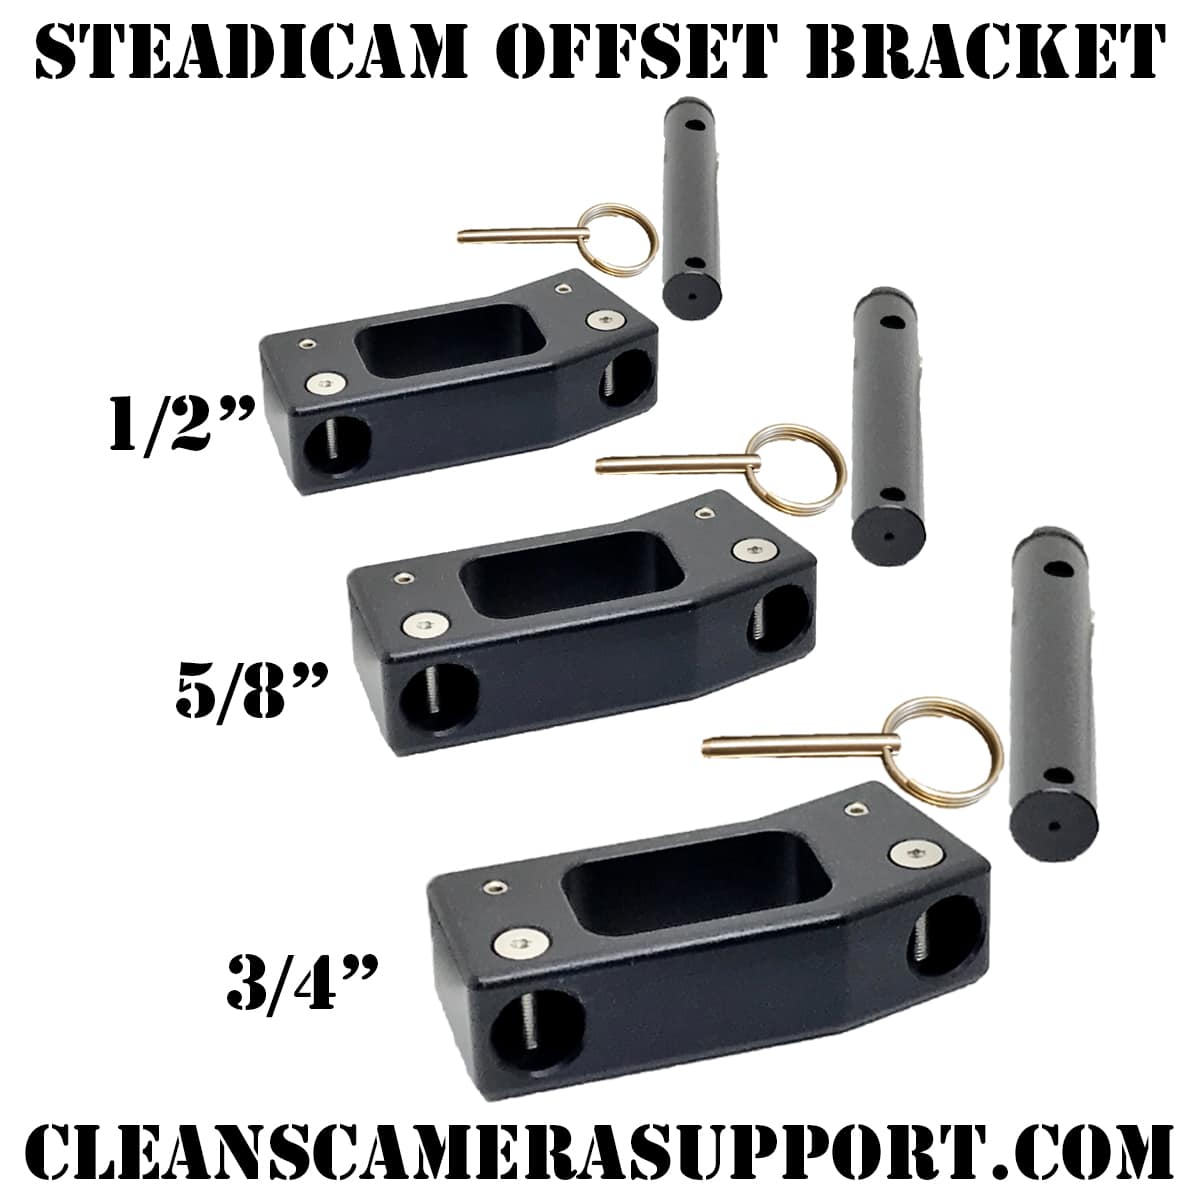 Steadicam Products  CLEANS CAMERA SUPPORT